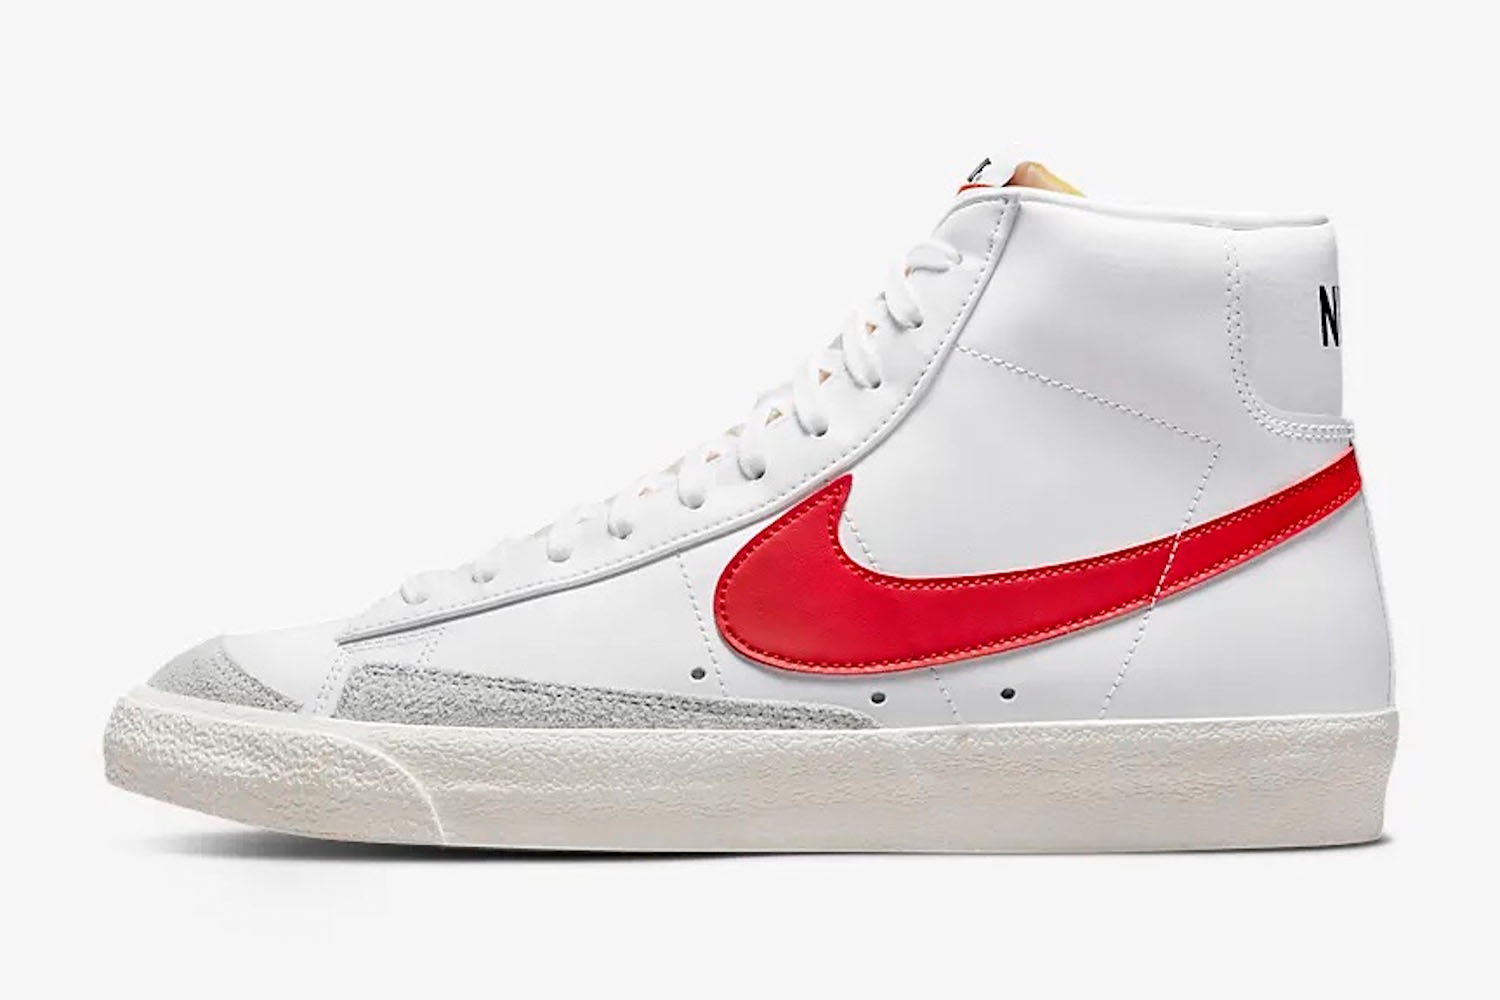 a pair of white and red accented Nike Blazer Mid '77 sneakers from Nike on a white background